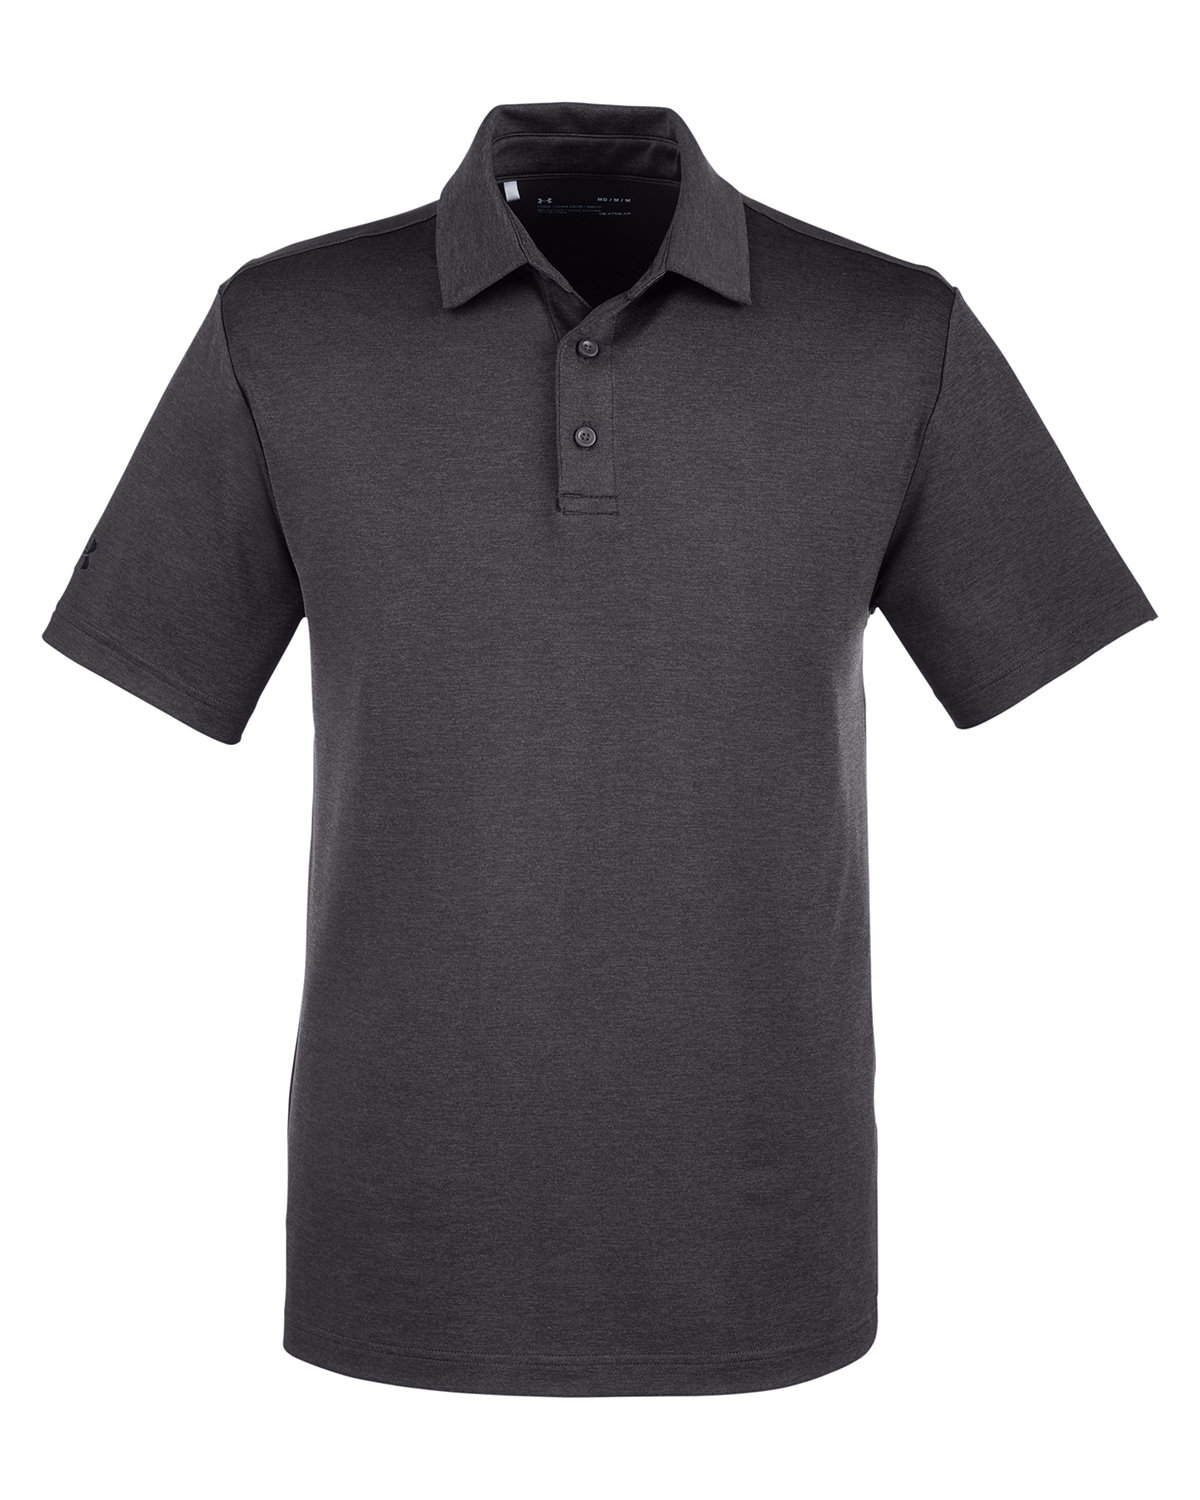 Under Armour Mens Corporate Playoff Polo | alphabroder